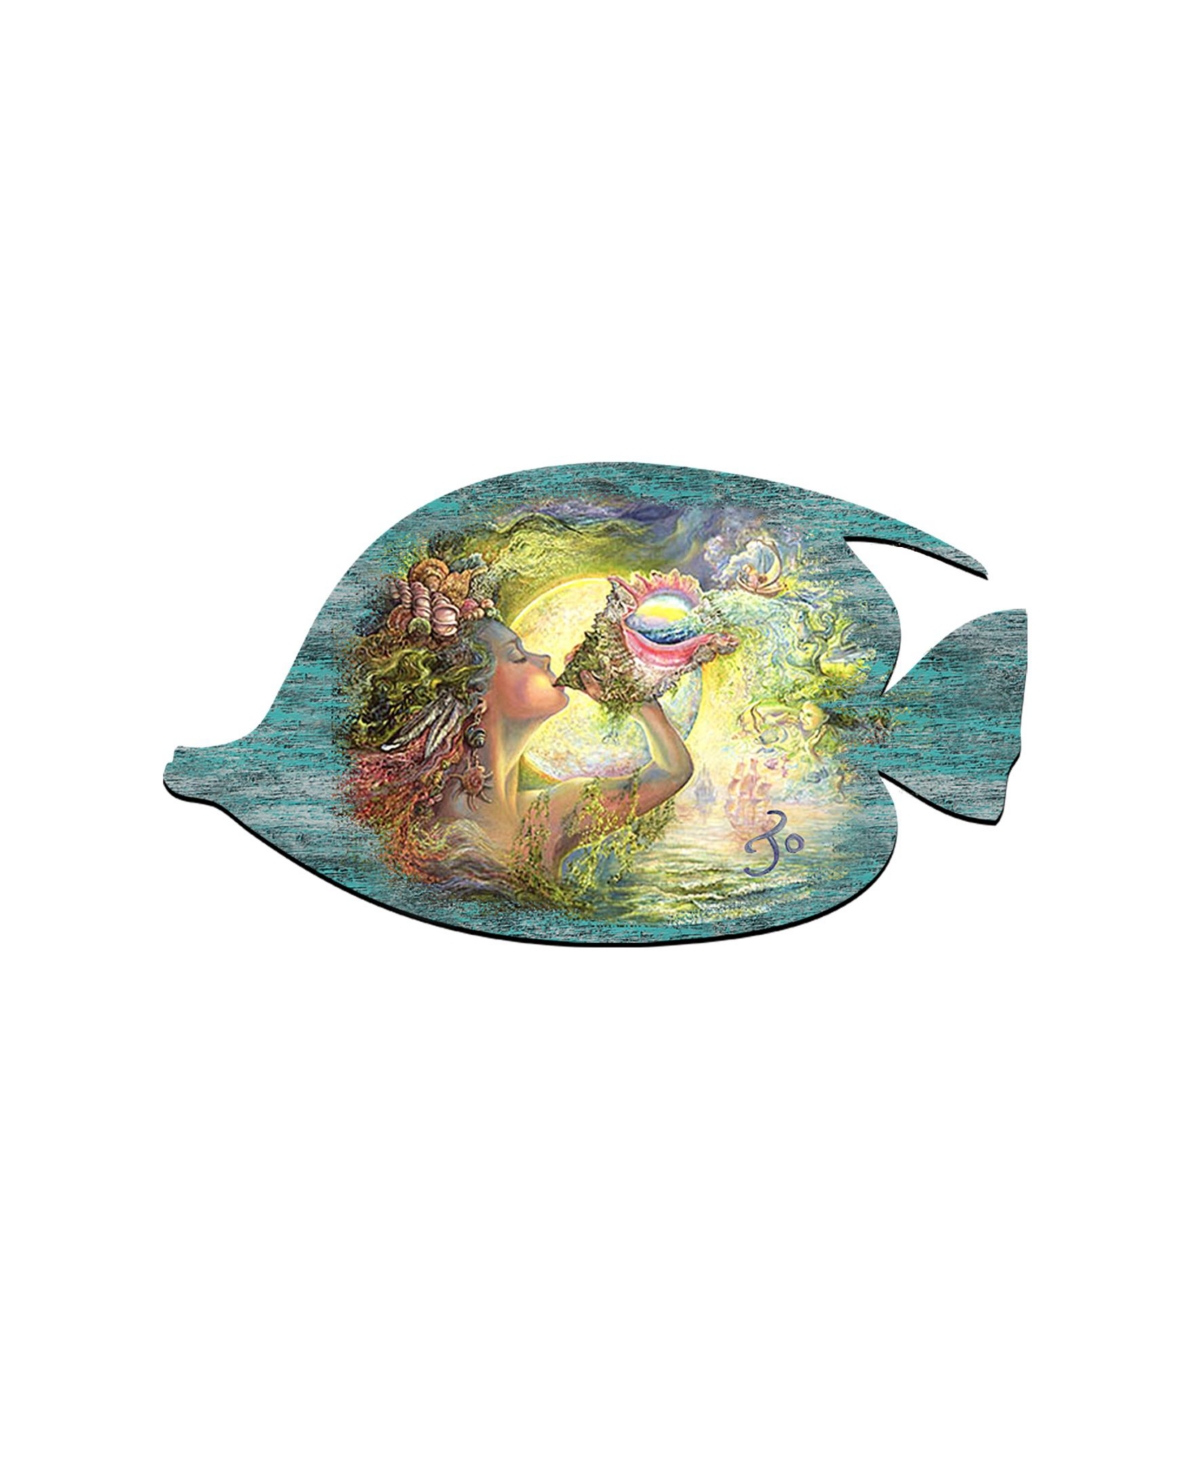 Call of The Sea Oversized Wall Over The Door and Yard Decor Wood by Josephine Wall - Multi